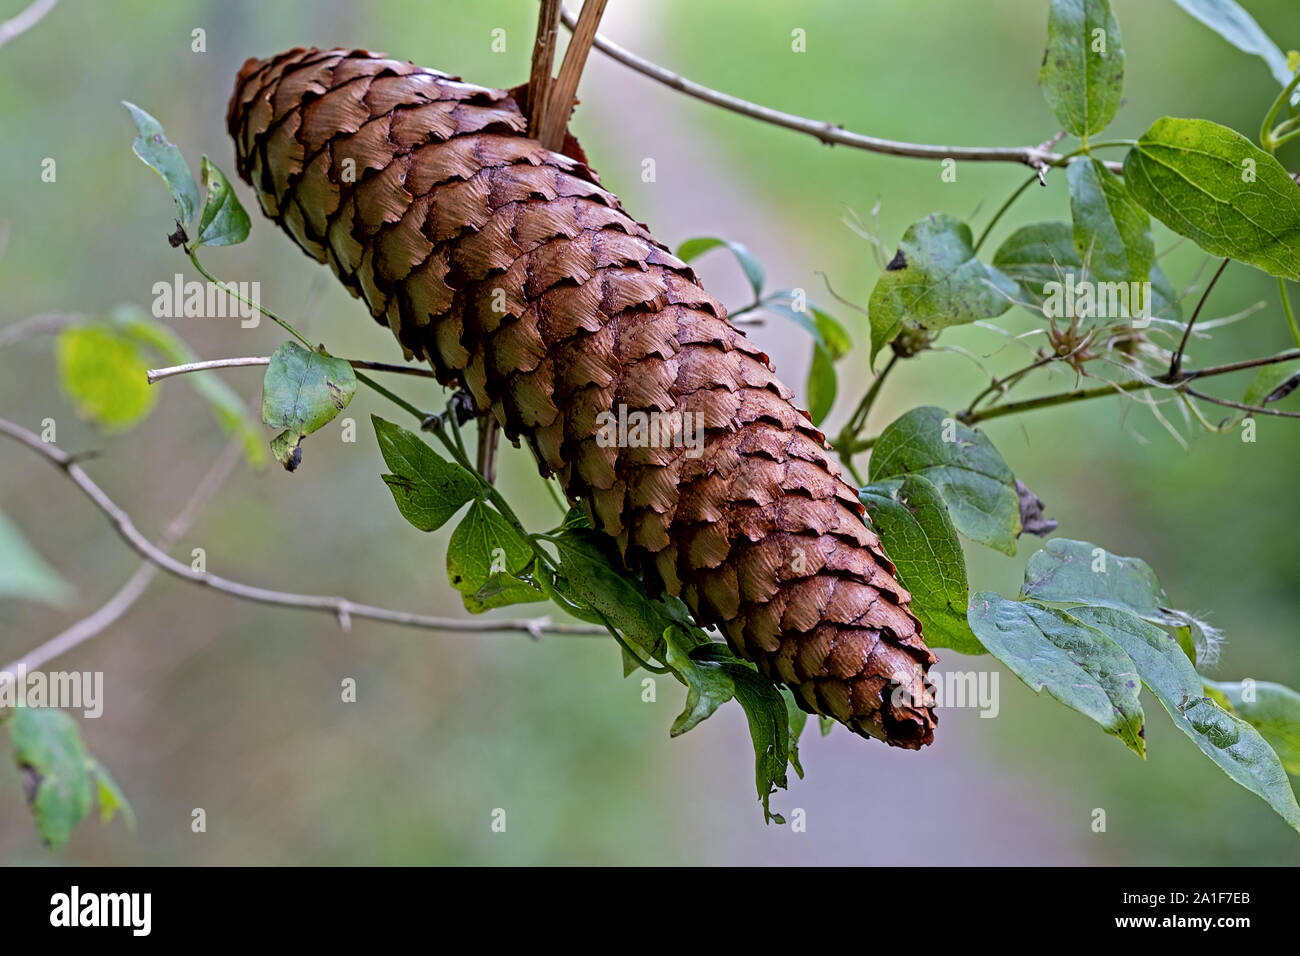 falling spruce cone caught by a clematis tendril Stock Photo